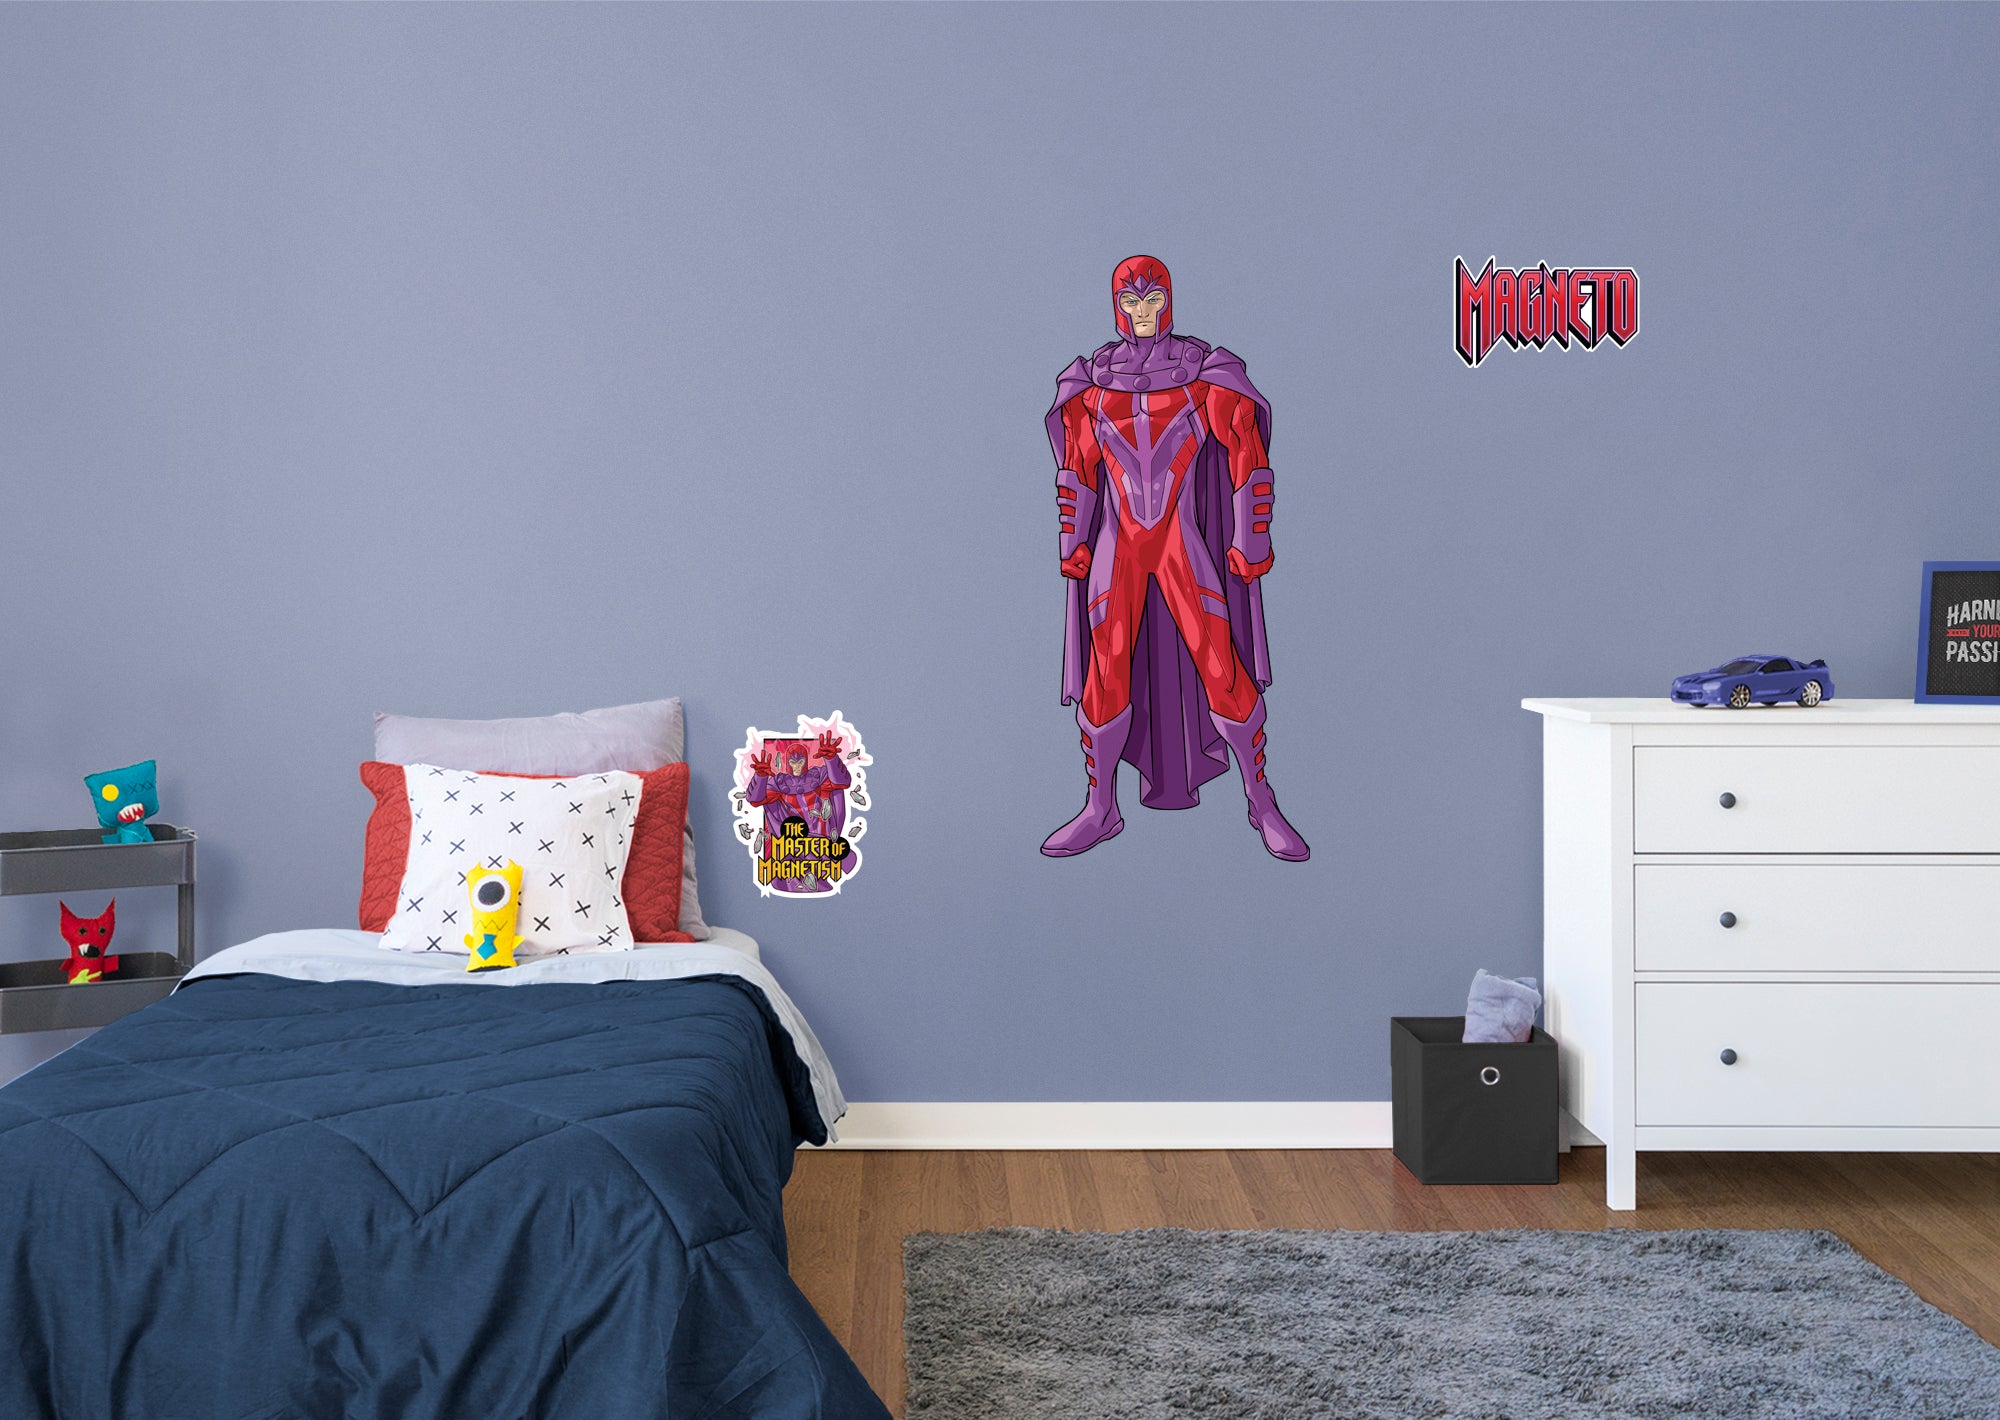 X-Men Magneto RealBig - Officially Licensed Marvel Removable Wall Decal Giant Character + 2 Decals (21"W x 51"H) by Fathead | Vi